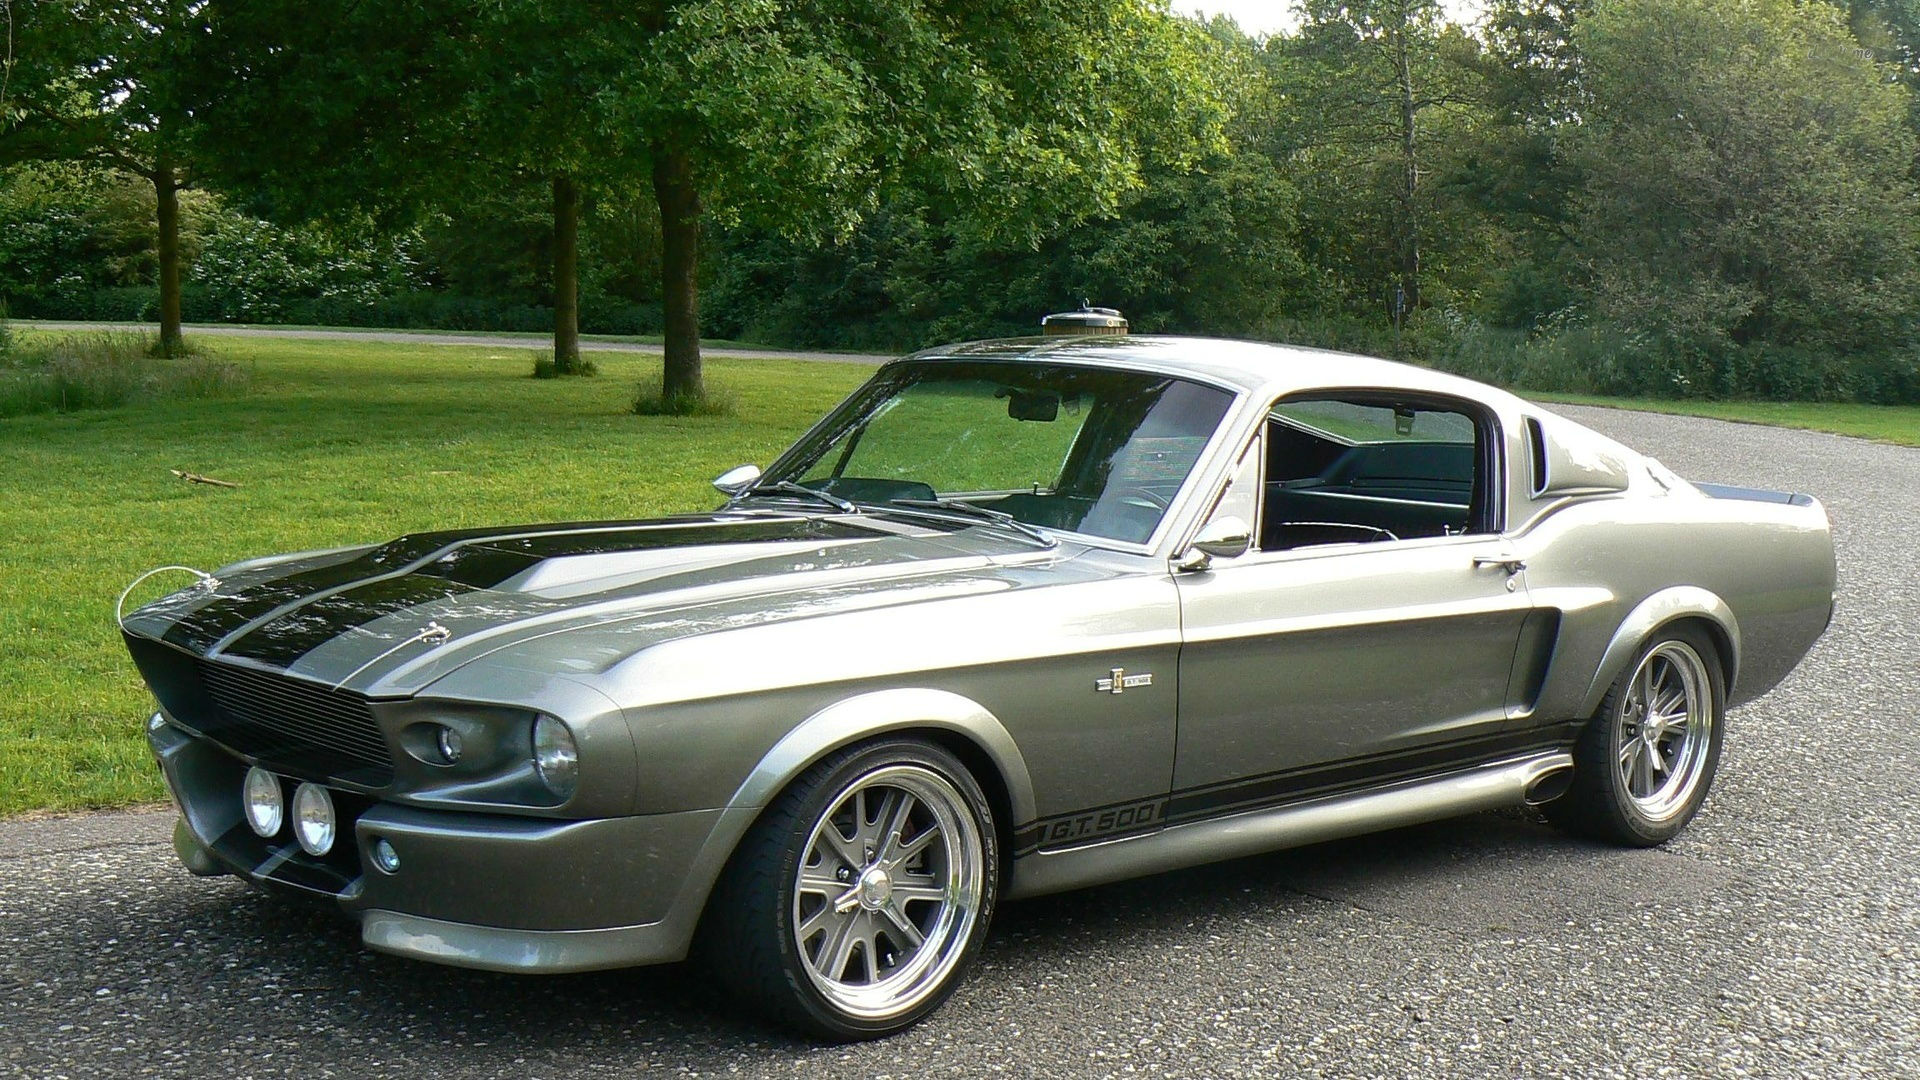 Ford Mustang Shelby Gt Car Wallpaper